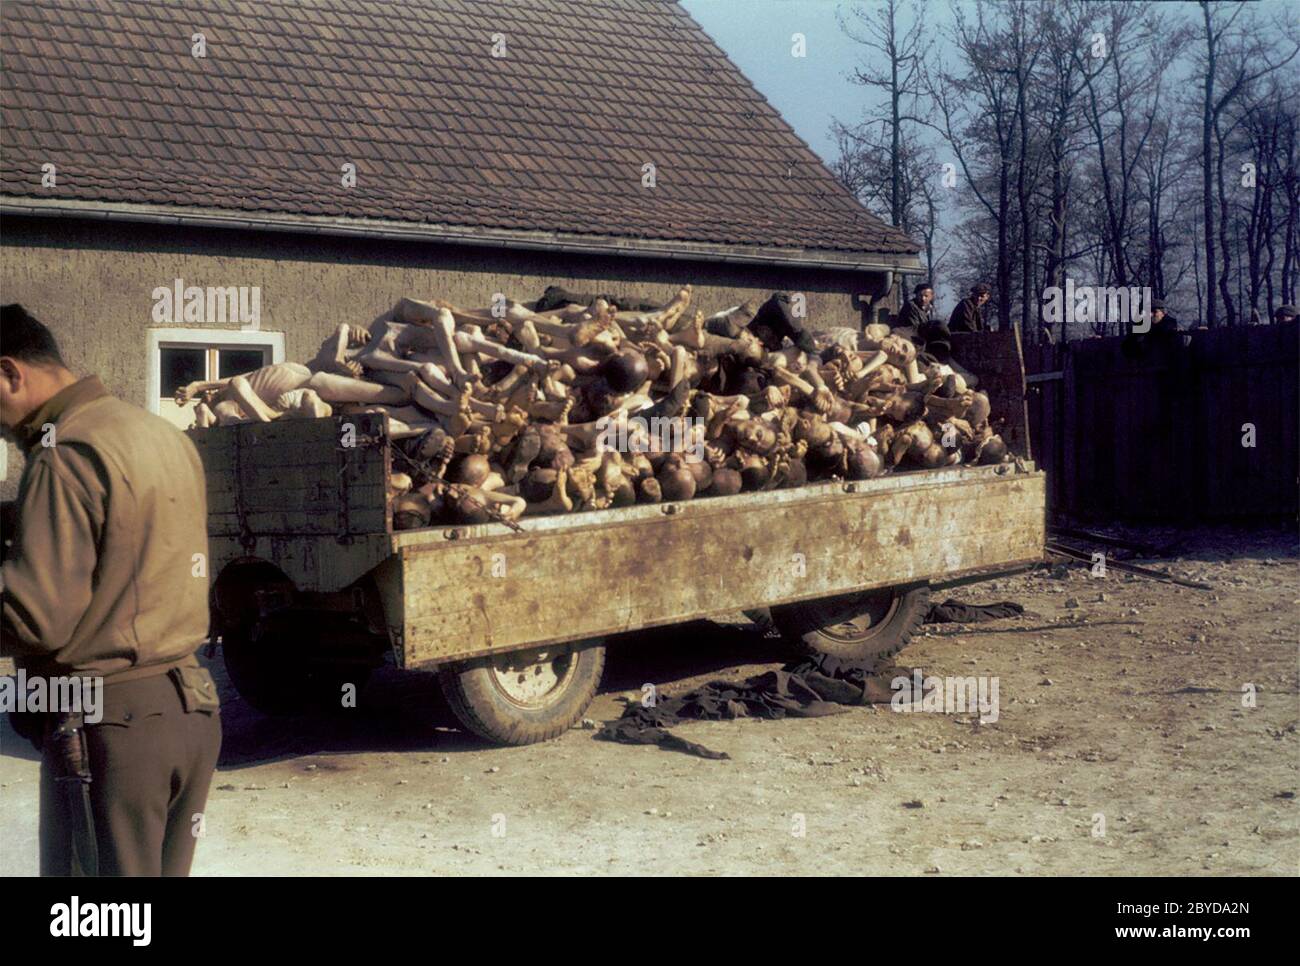 An American soldier stands near a wagon loaded with corpses outside the crematorium of the Buchenwald concentration camp, Germany, following its liberation. 16 April 1945 Stock Photo